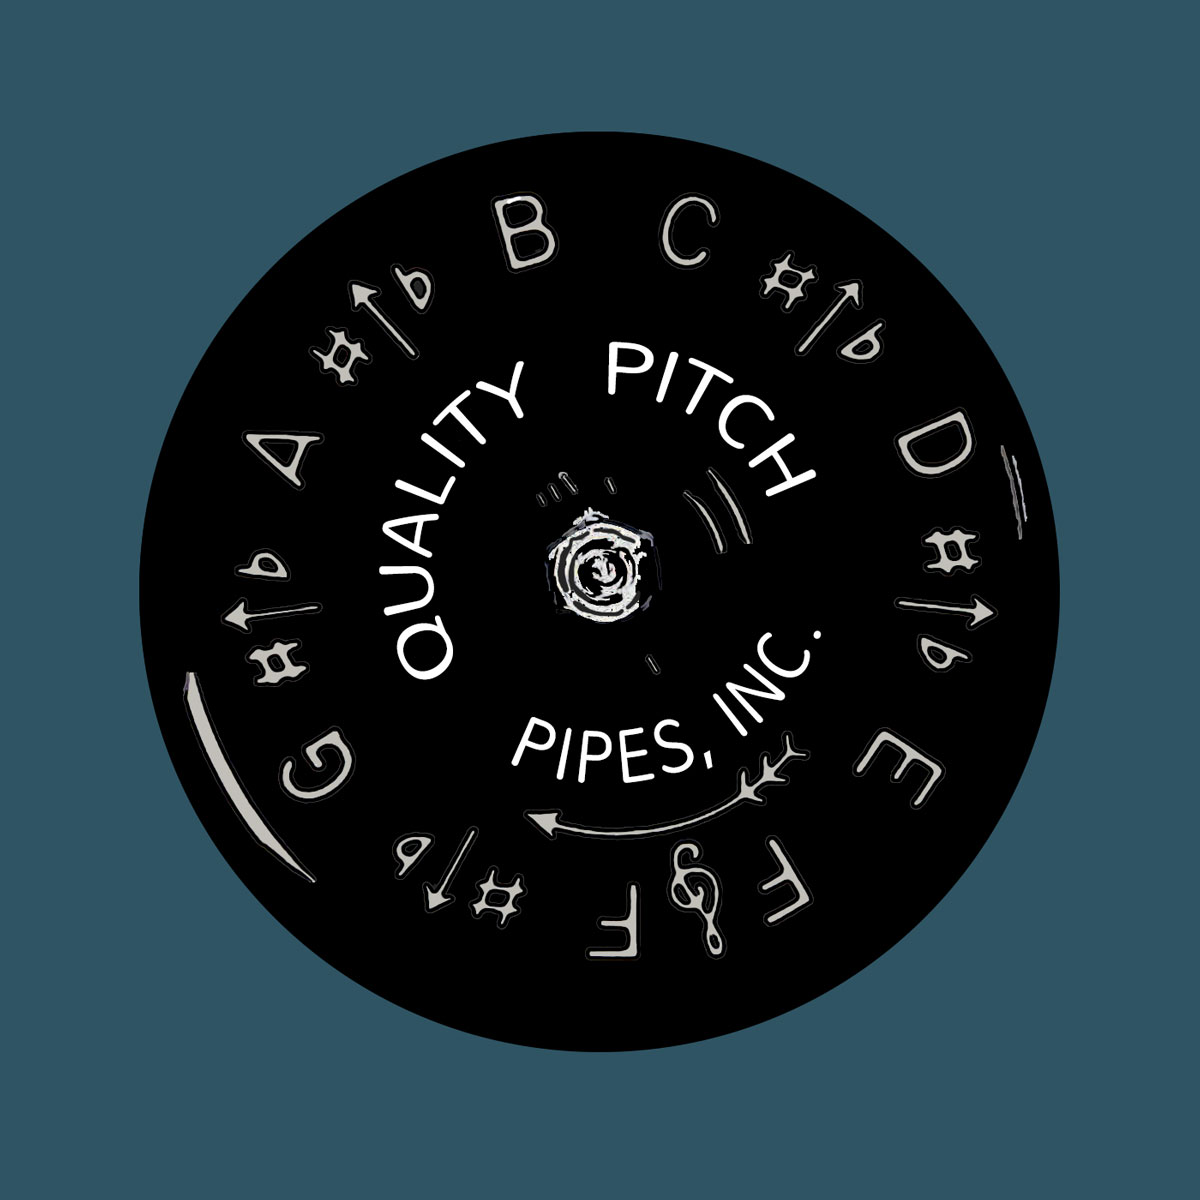 Quality Pitch Pipes 2